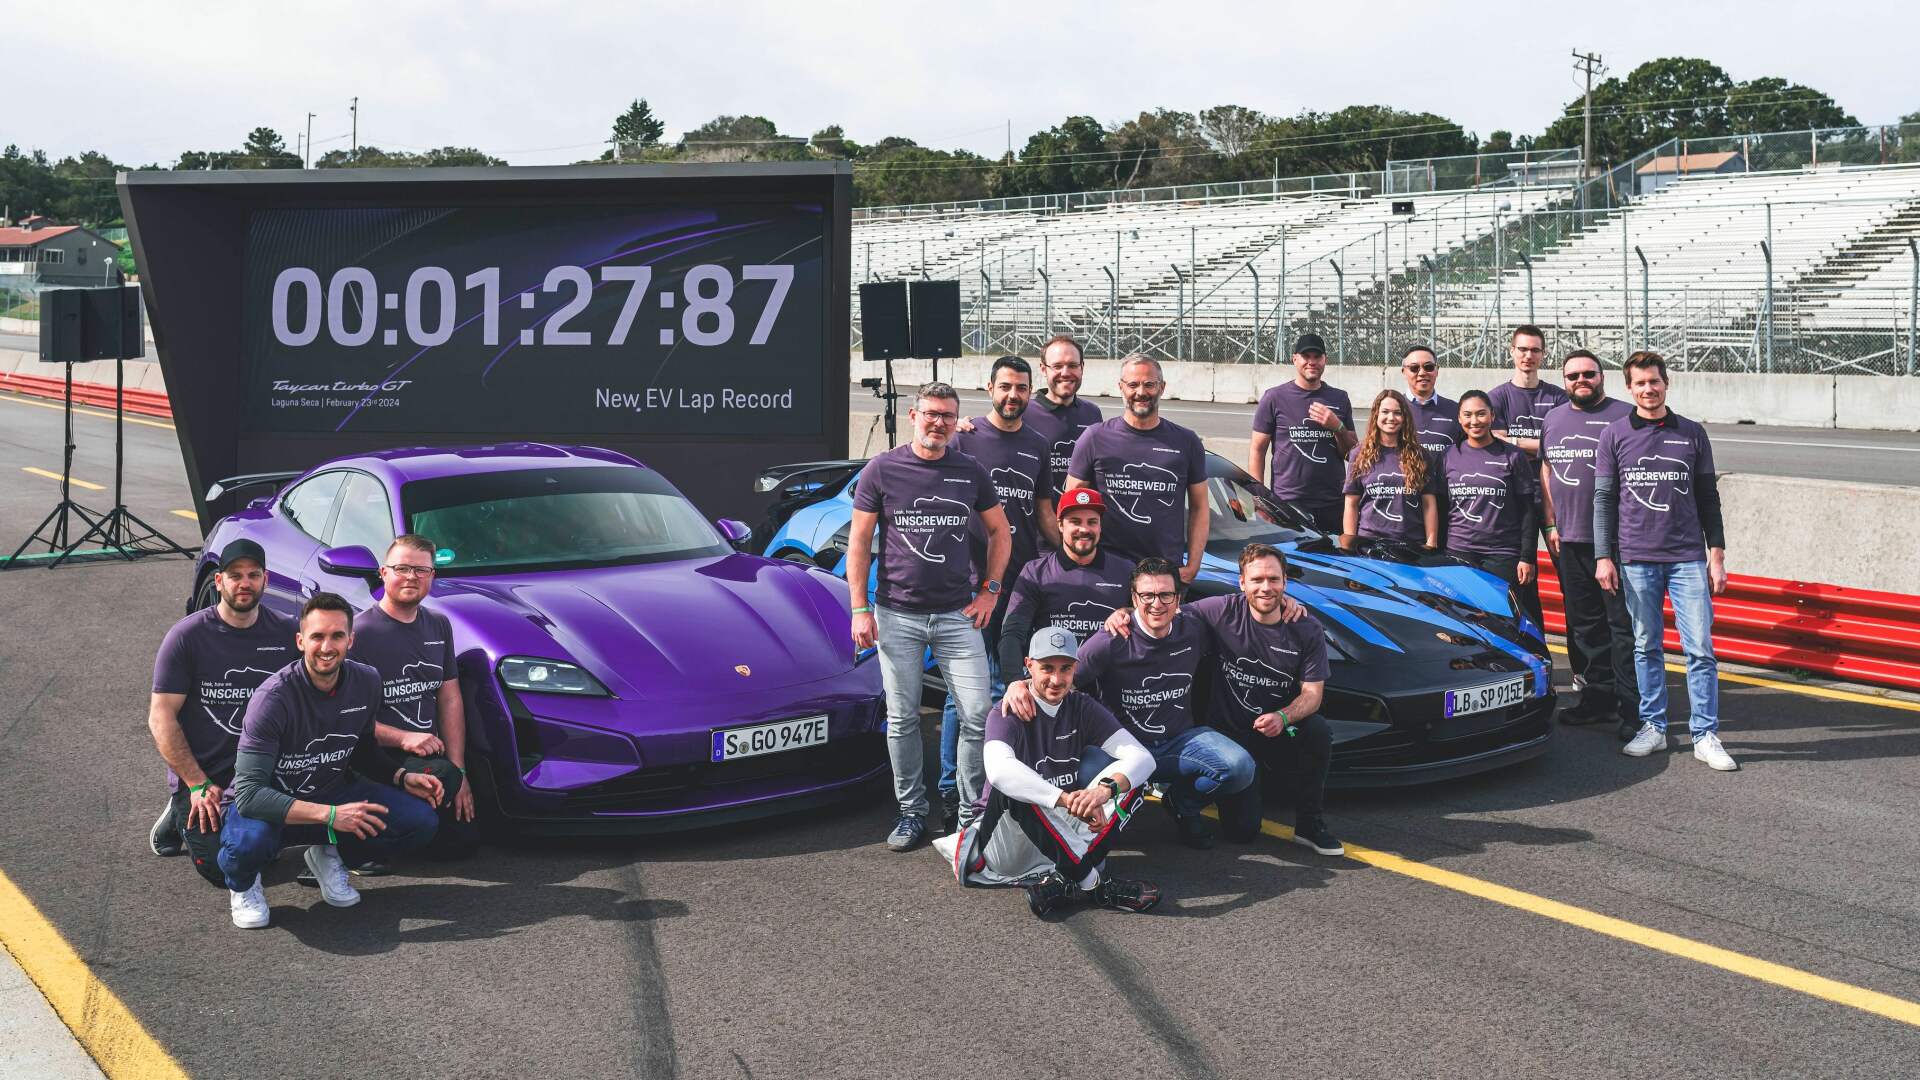 The Porsche Taycan Turbo GT Team At The California Track After Setting The Lap Record (Credits: Porsche Newsroom)